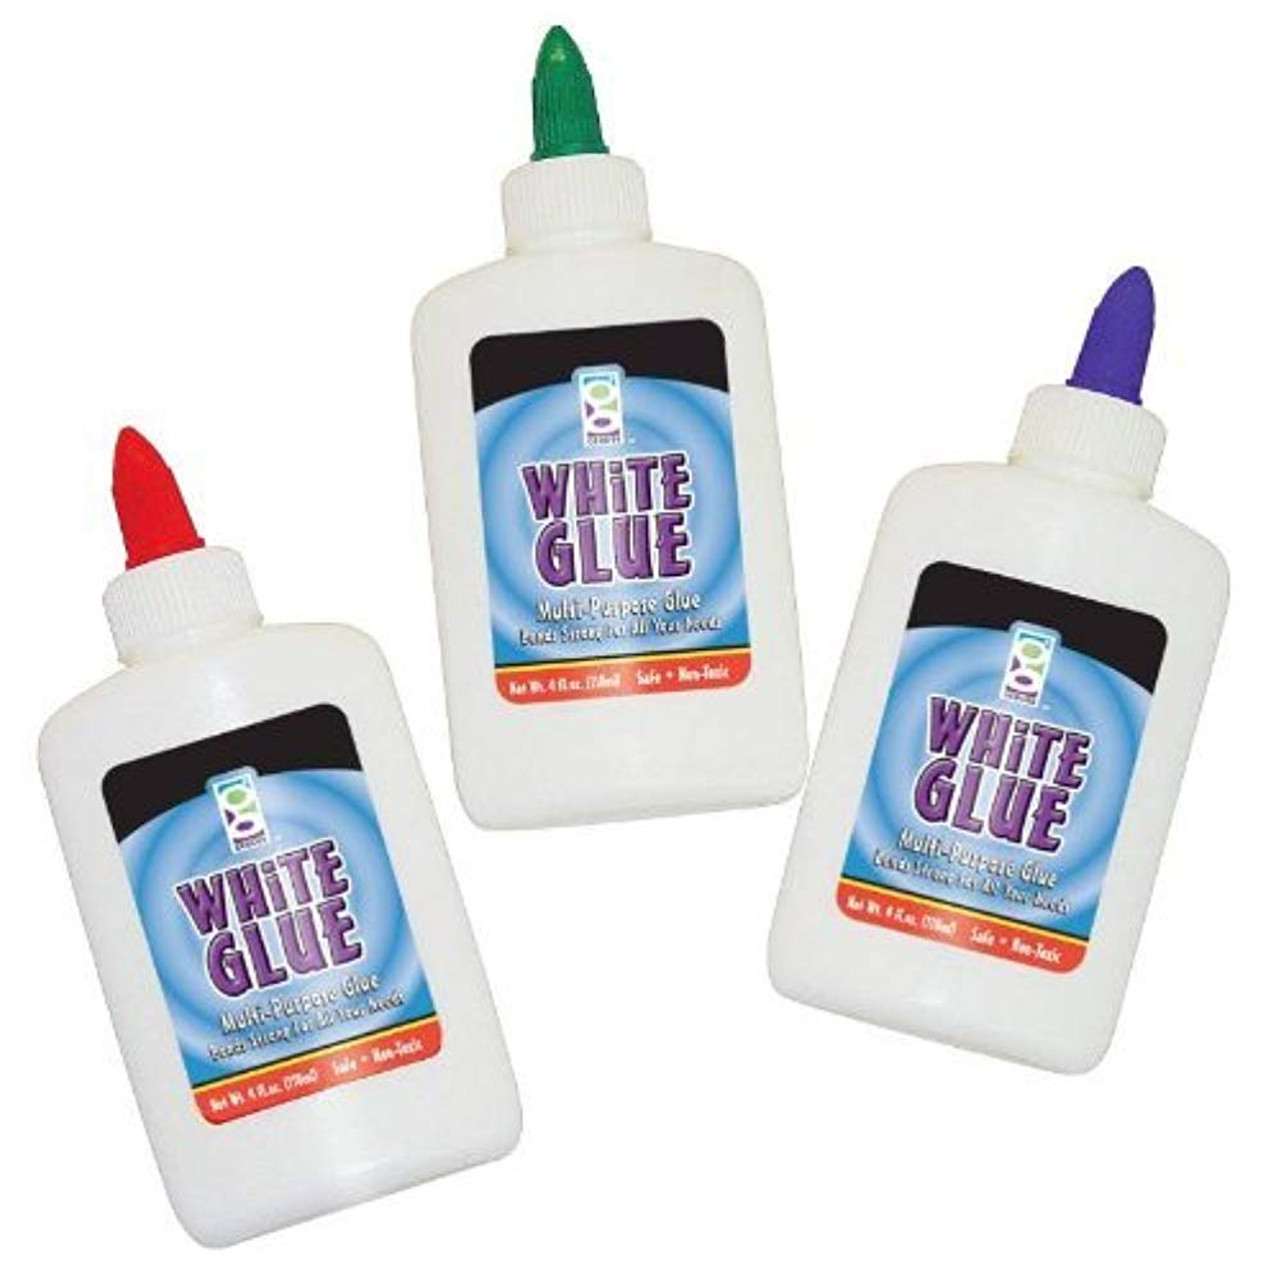 Puzzleworx Easy-On Applicator Puzzle Glue Pack of 2 Non Toxic Clear Glue for 1000 Piece Puzzles 4.2 oz Each Bottle (TOTAL 8.4)